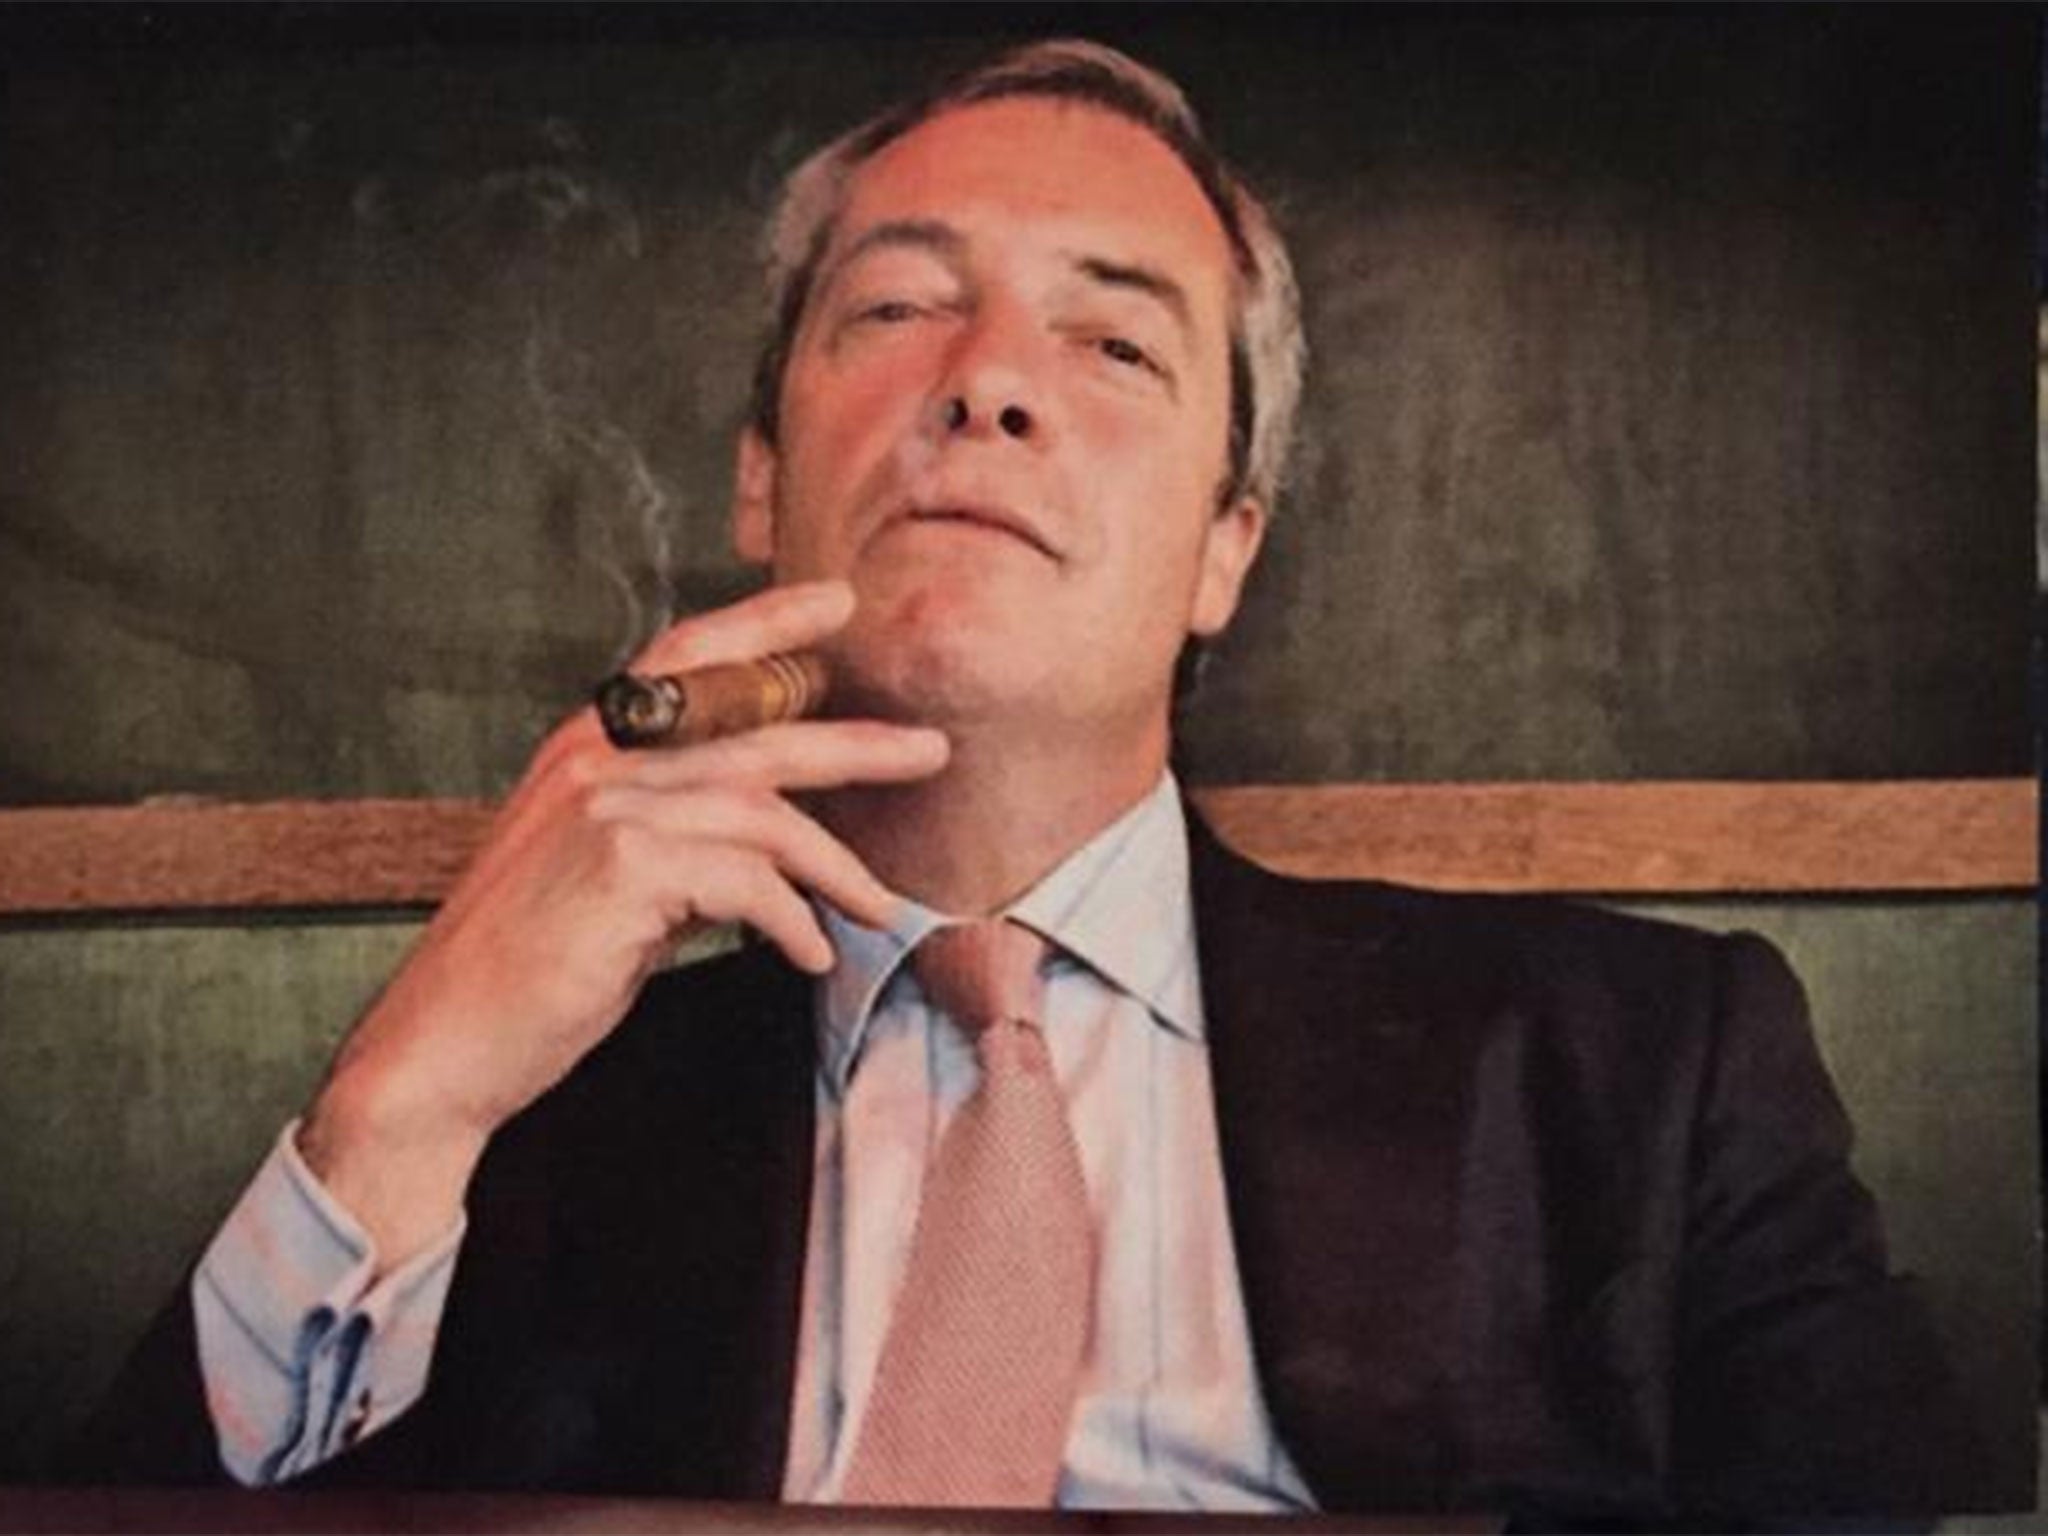 Image from a flyer at the CPAC event where Nigel Farage will be speaking